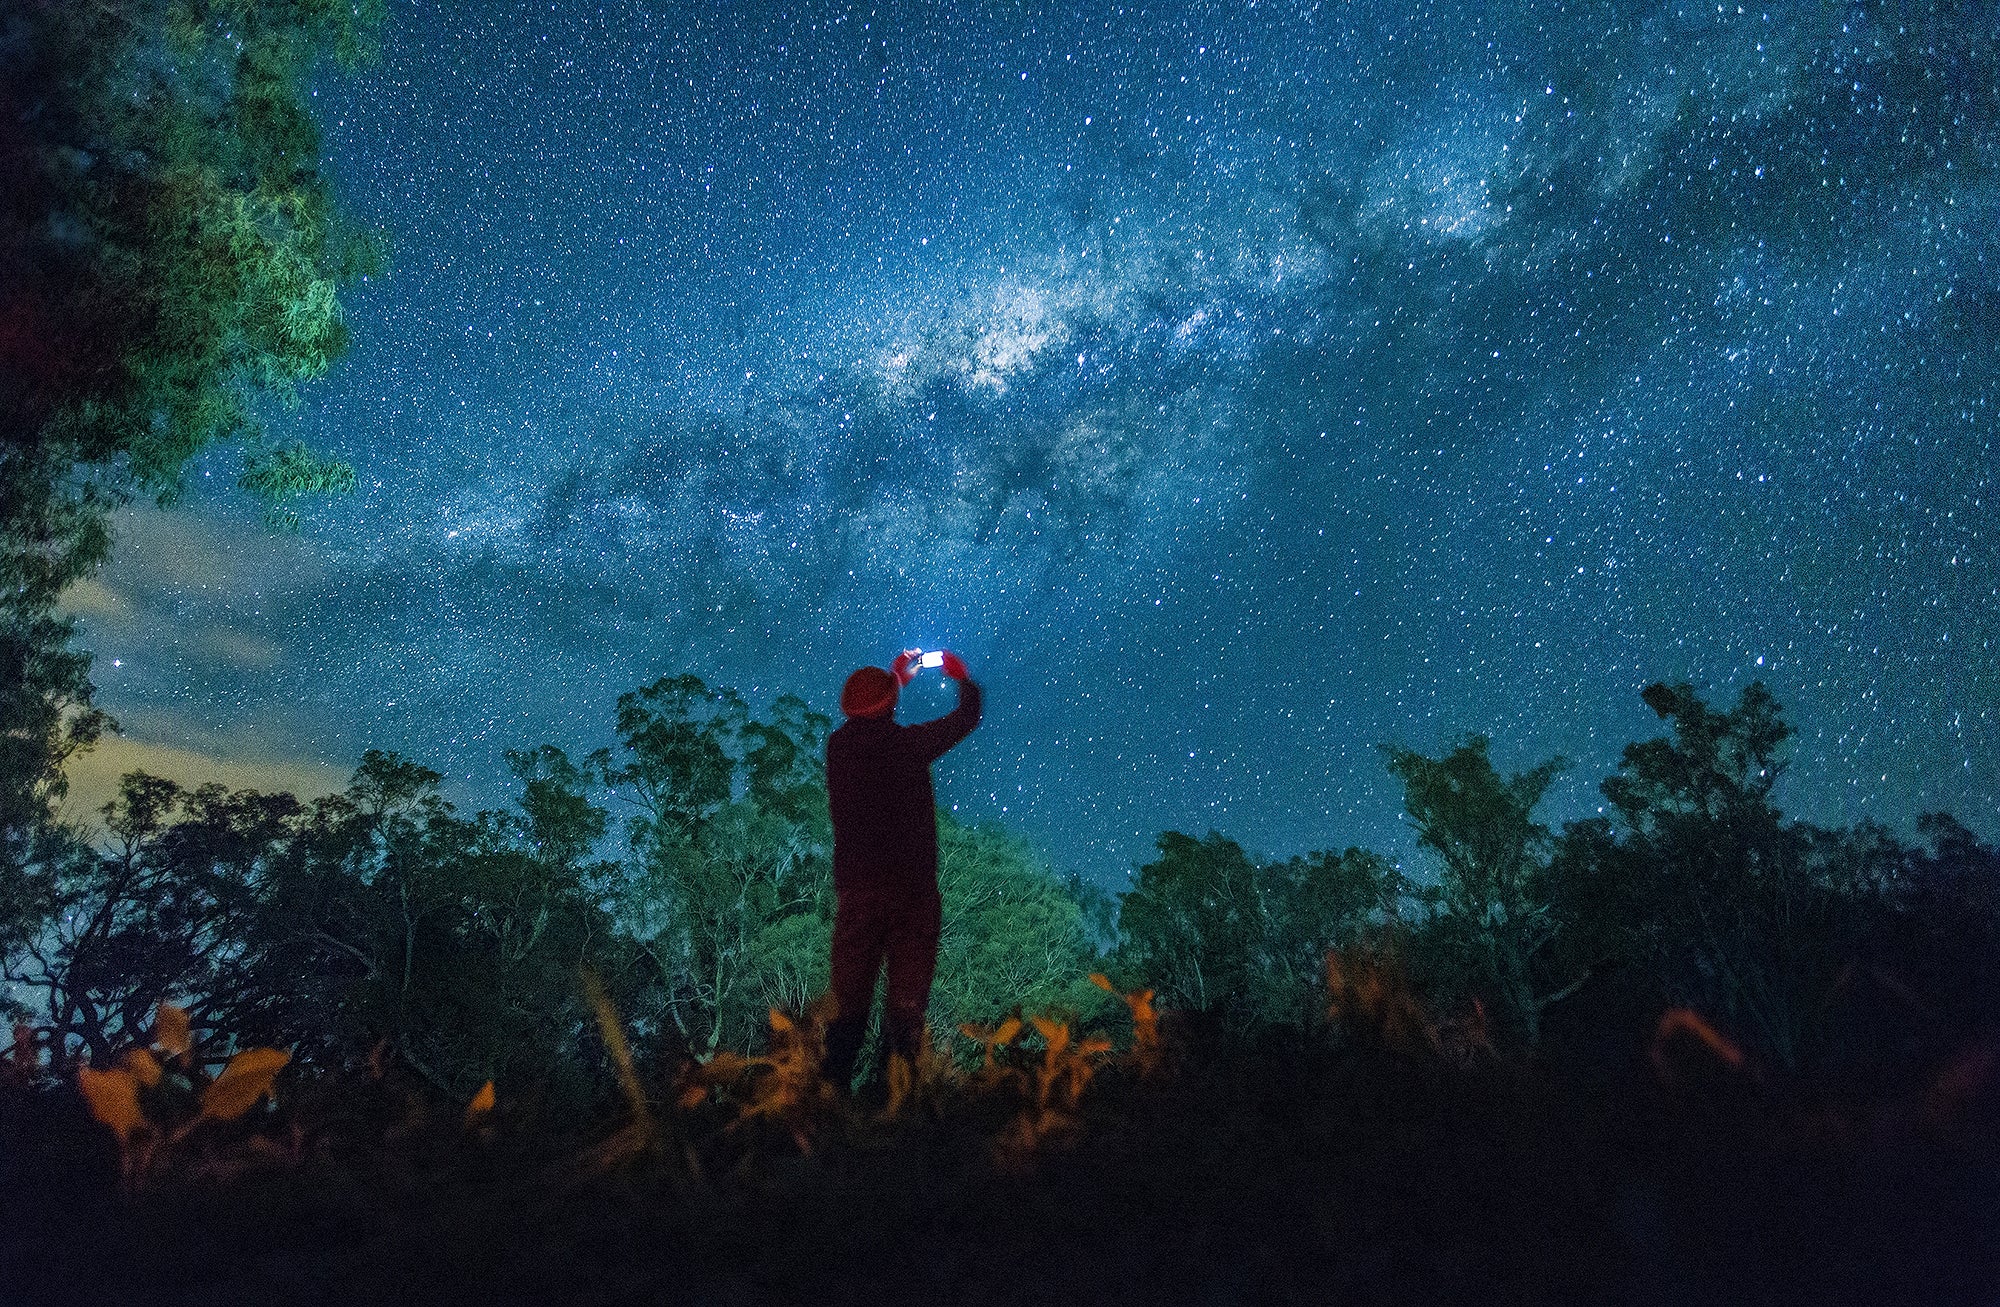 Man taking photo of night sky with smartphone